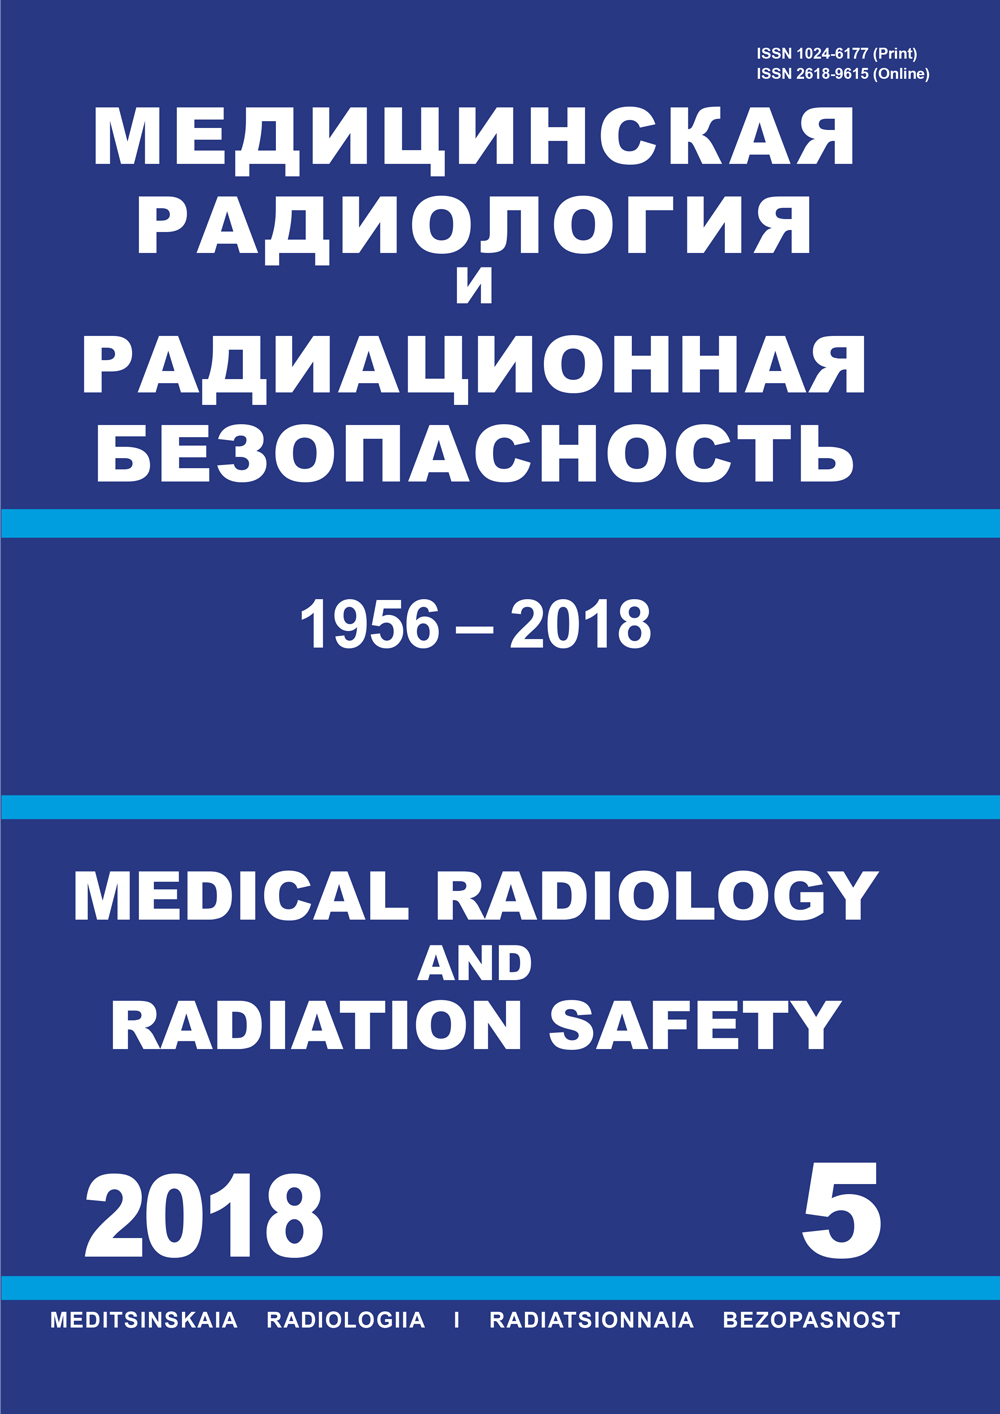                         The State of Art in Radiation Safety Regulation at the Nuclear Legacy Site on the Kola Peninsula of the Russian Federation: The Point of View of Russian and Foreign Experts
            